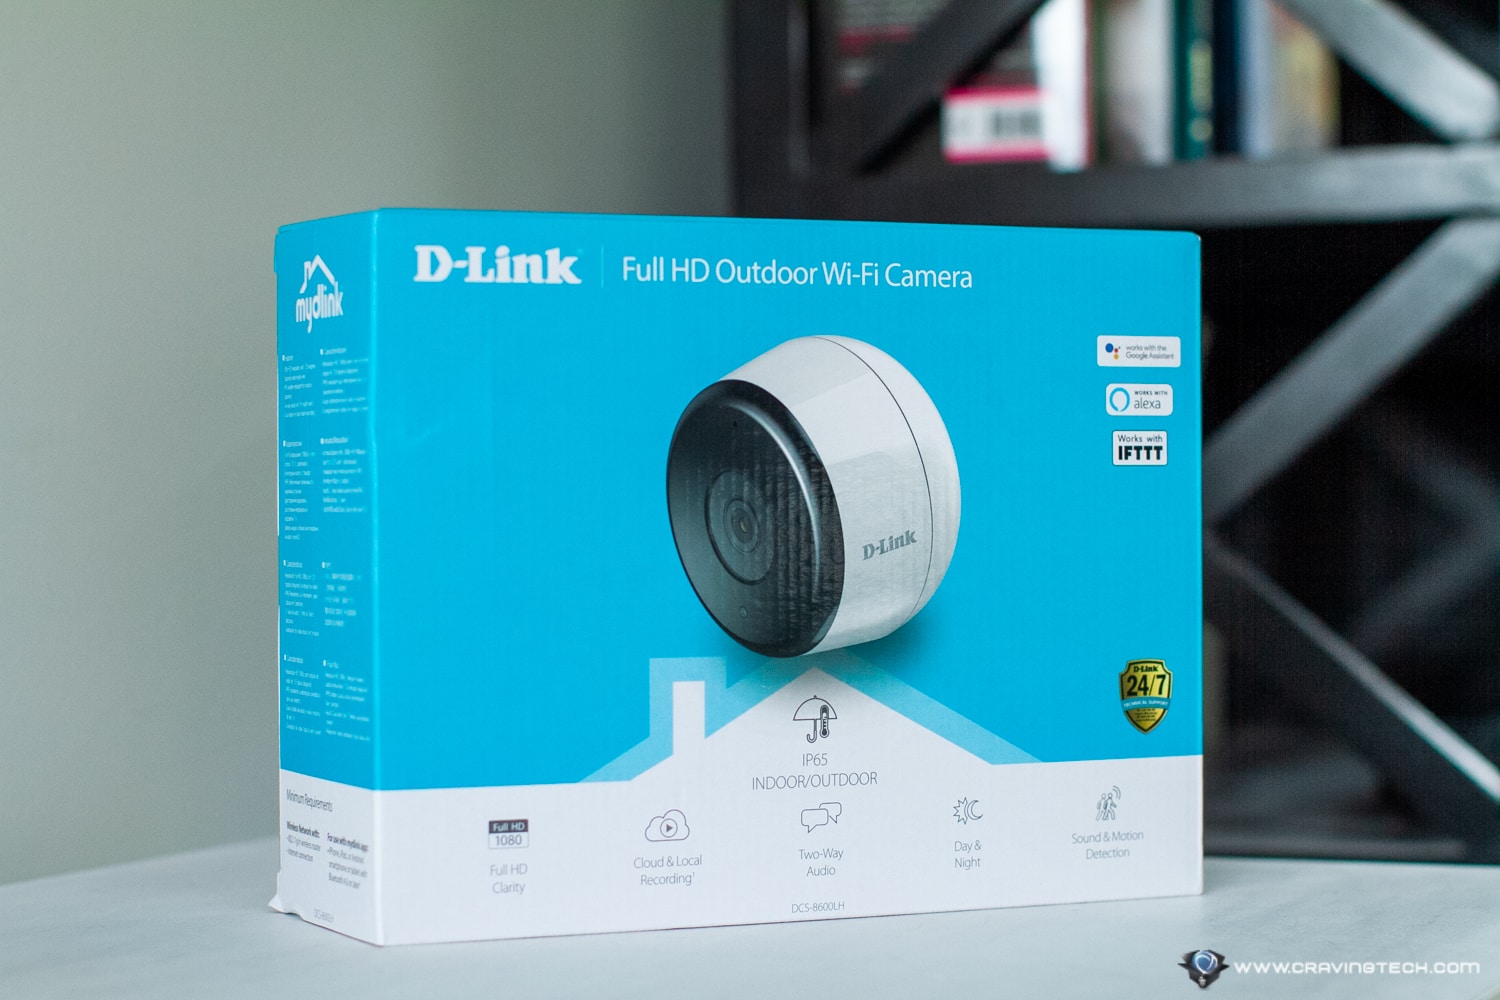 D-Link DCS-8600LH Full HD Outdoor Wi-Fi camera packaging